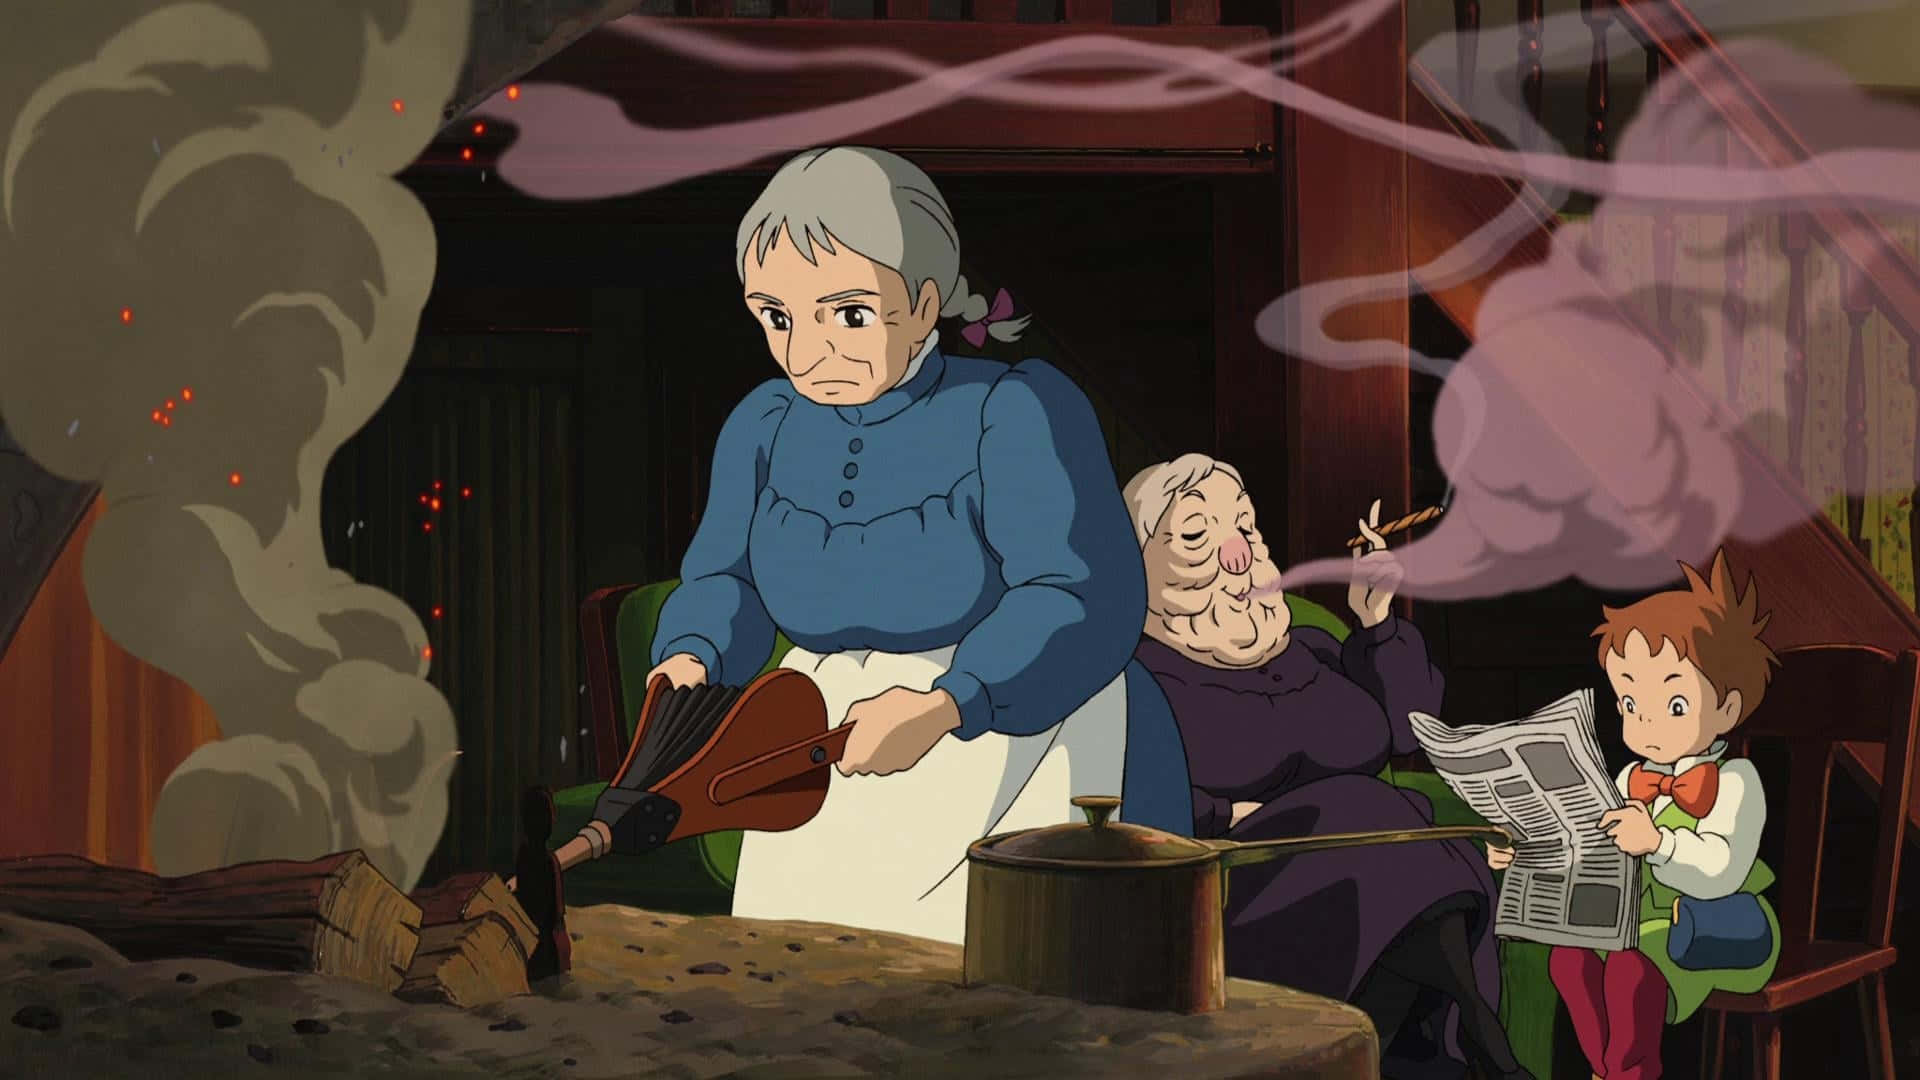 Howl's Moving Castle, a magical masterpiece by Hayao Miyazaki.